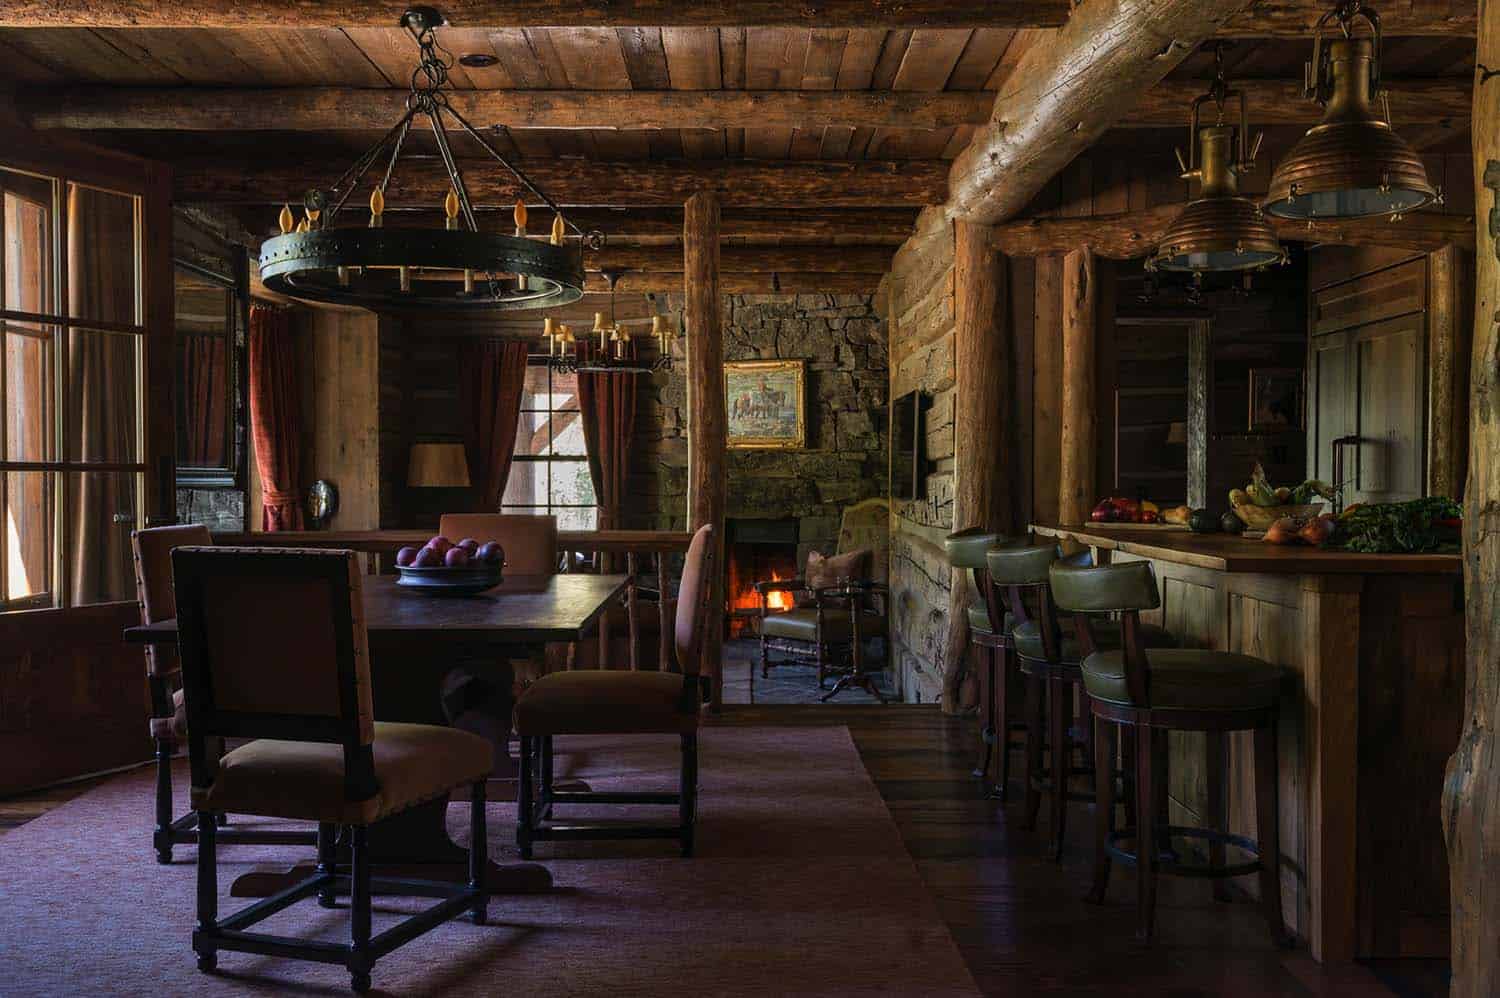 residence-rustic-kitchen